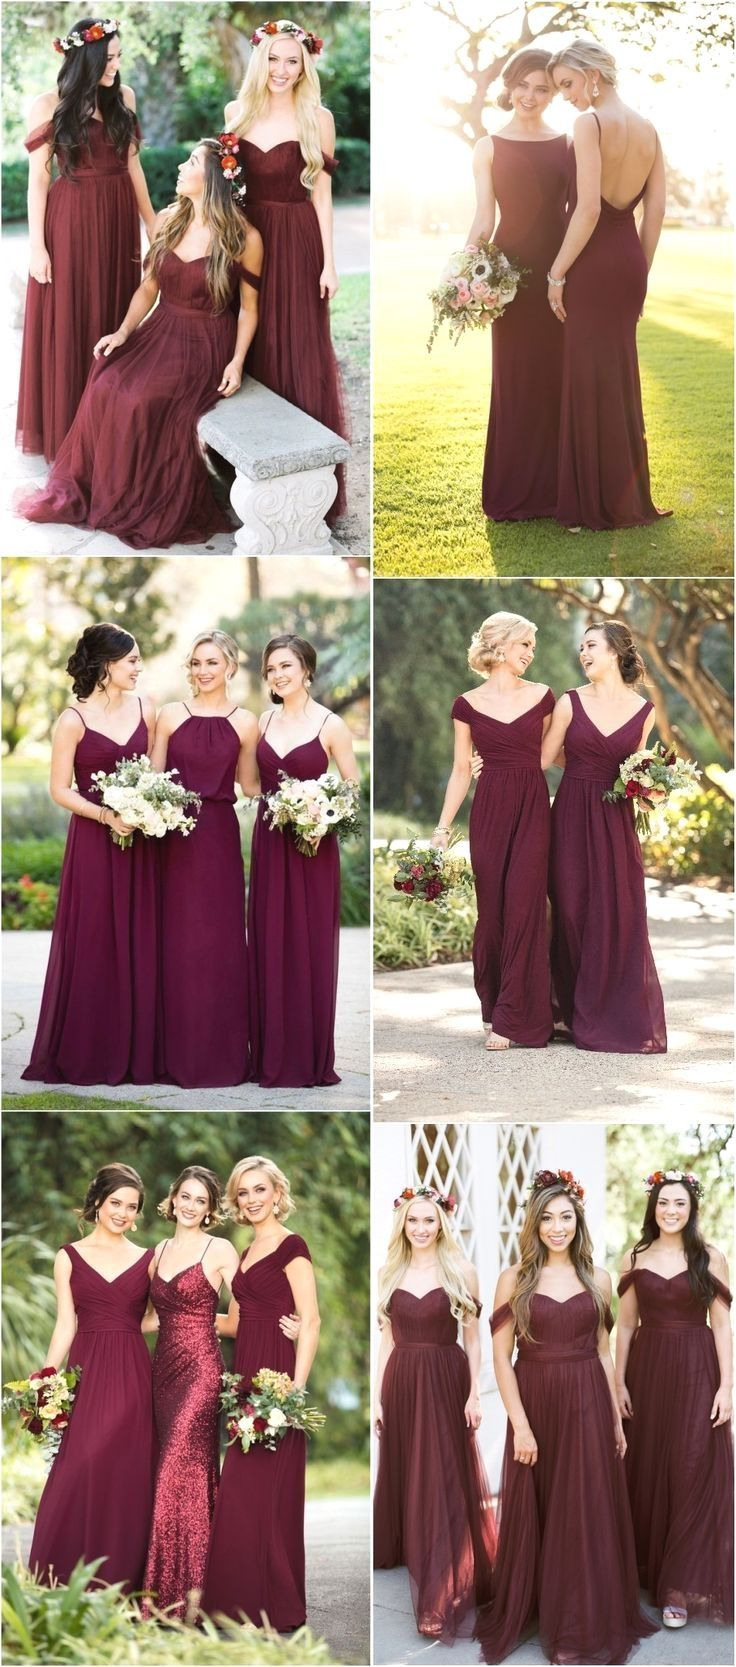 Bridesmaid Dresses. Pick A Best Suited Bridesmaid Dress For